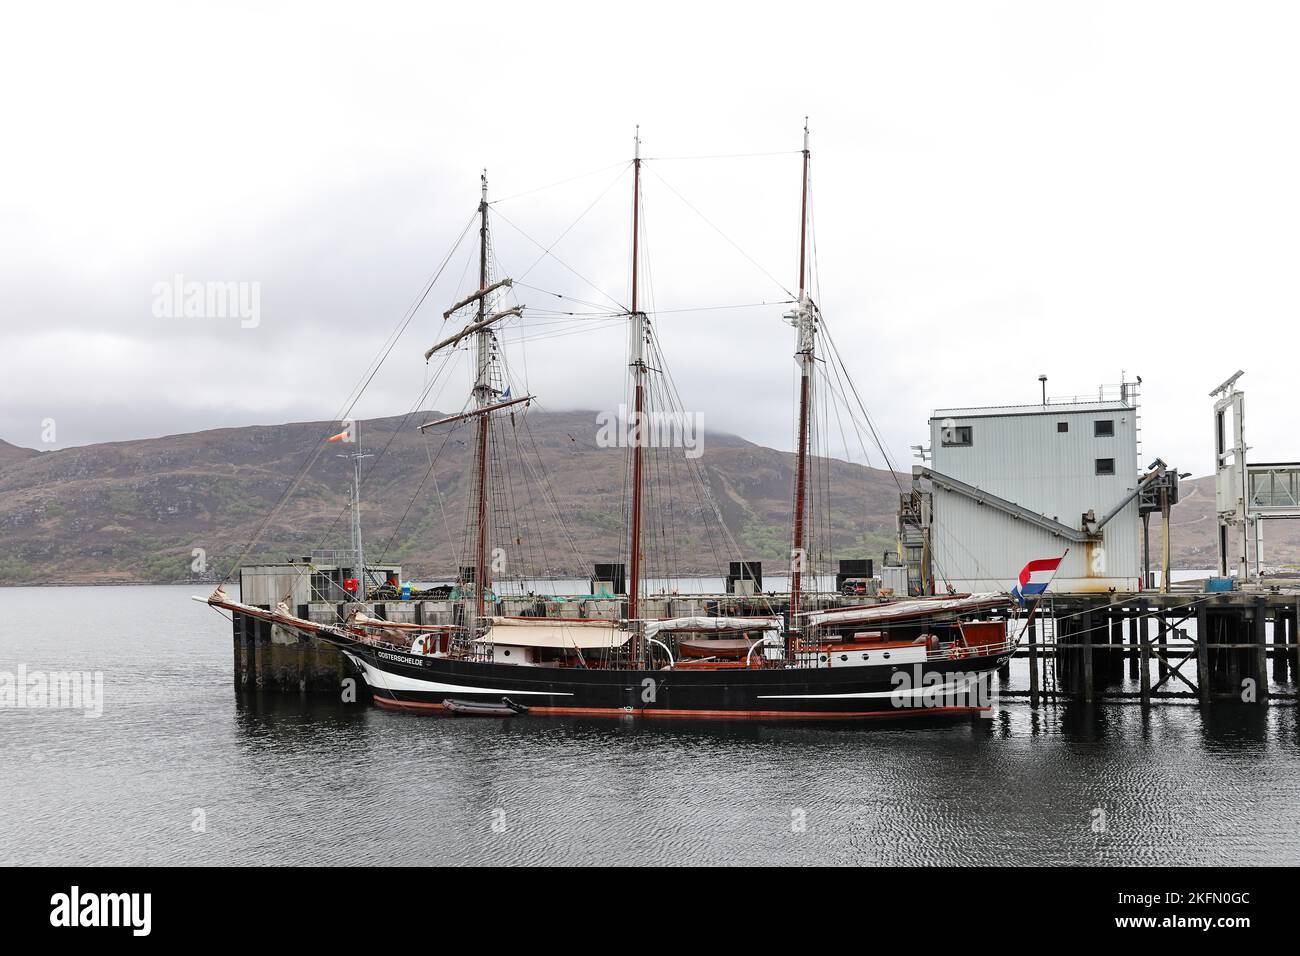 The Tall Ship Oosterschelde, a Dutch Three-masted Topsail Schooner, Moored in Ullapool, Scotland, UK Stock Photo